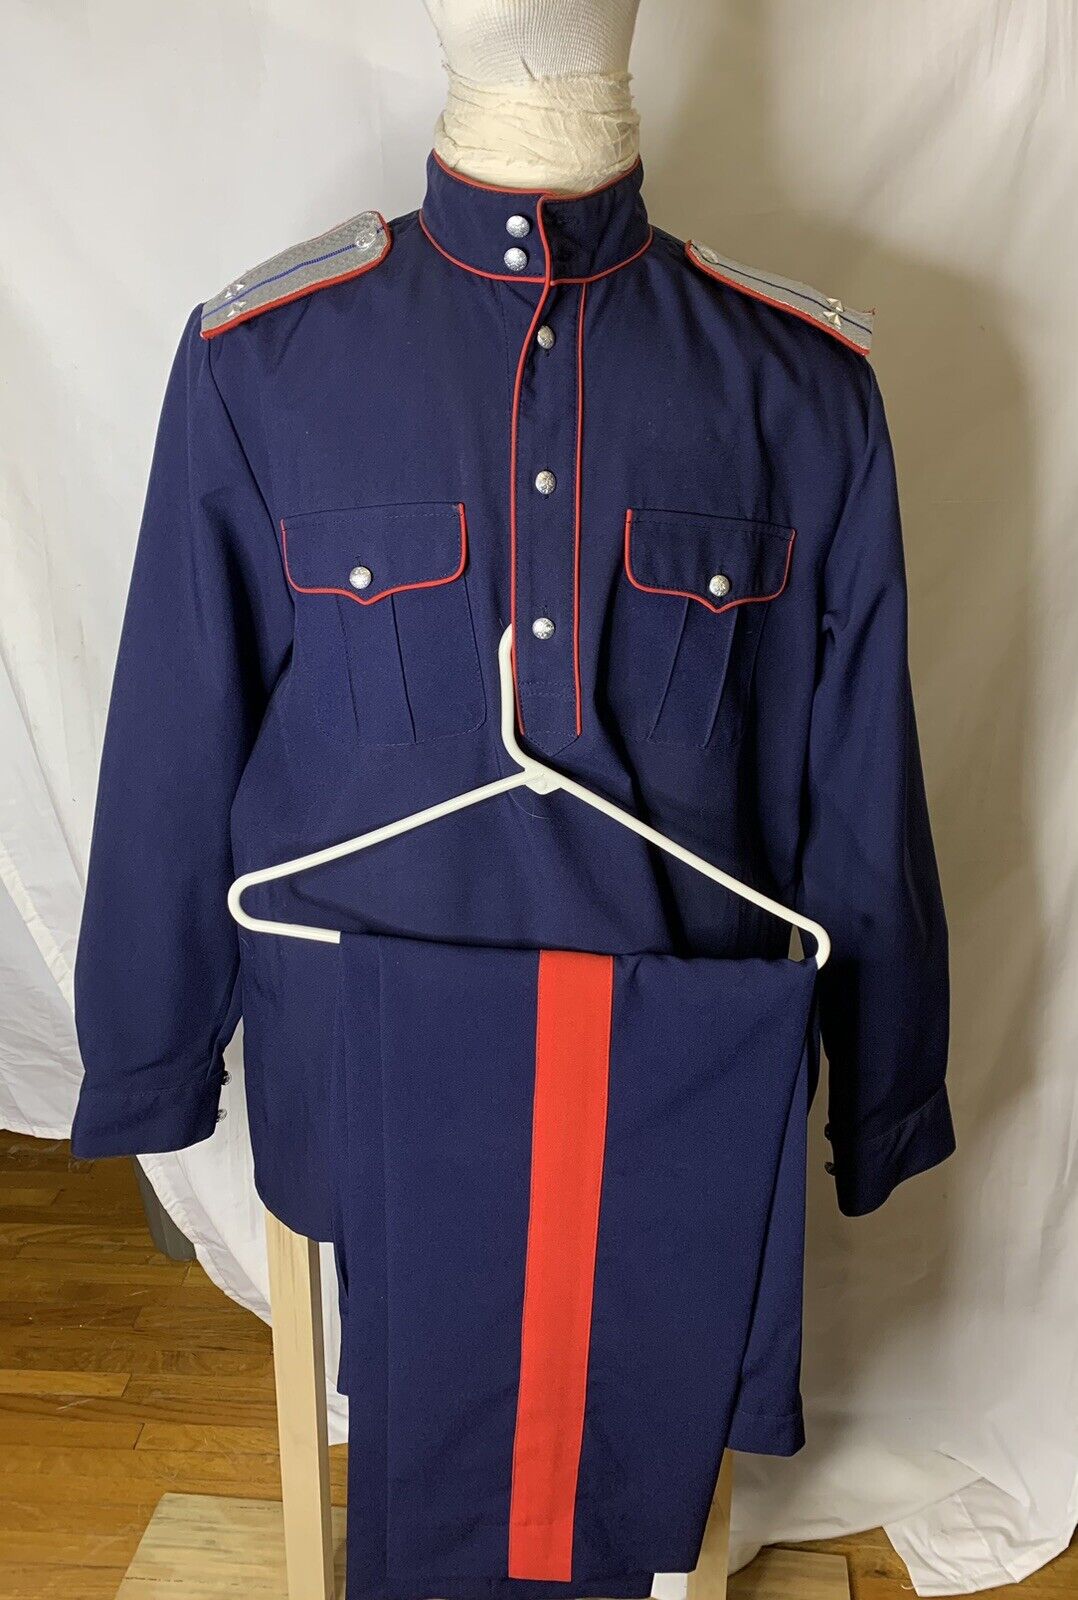 Don Cossack Uniform Made In Russia By Cossack Shop. Size 52 Russian ( 42 US)